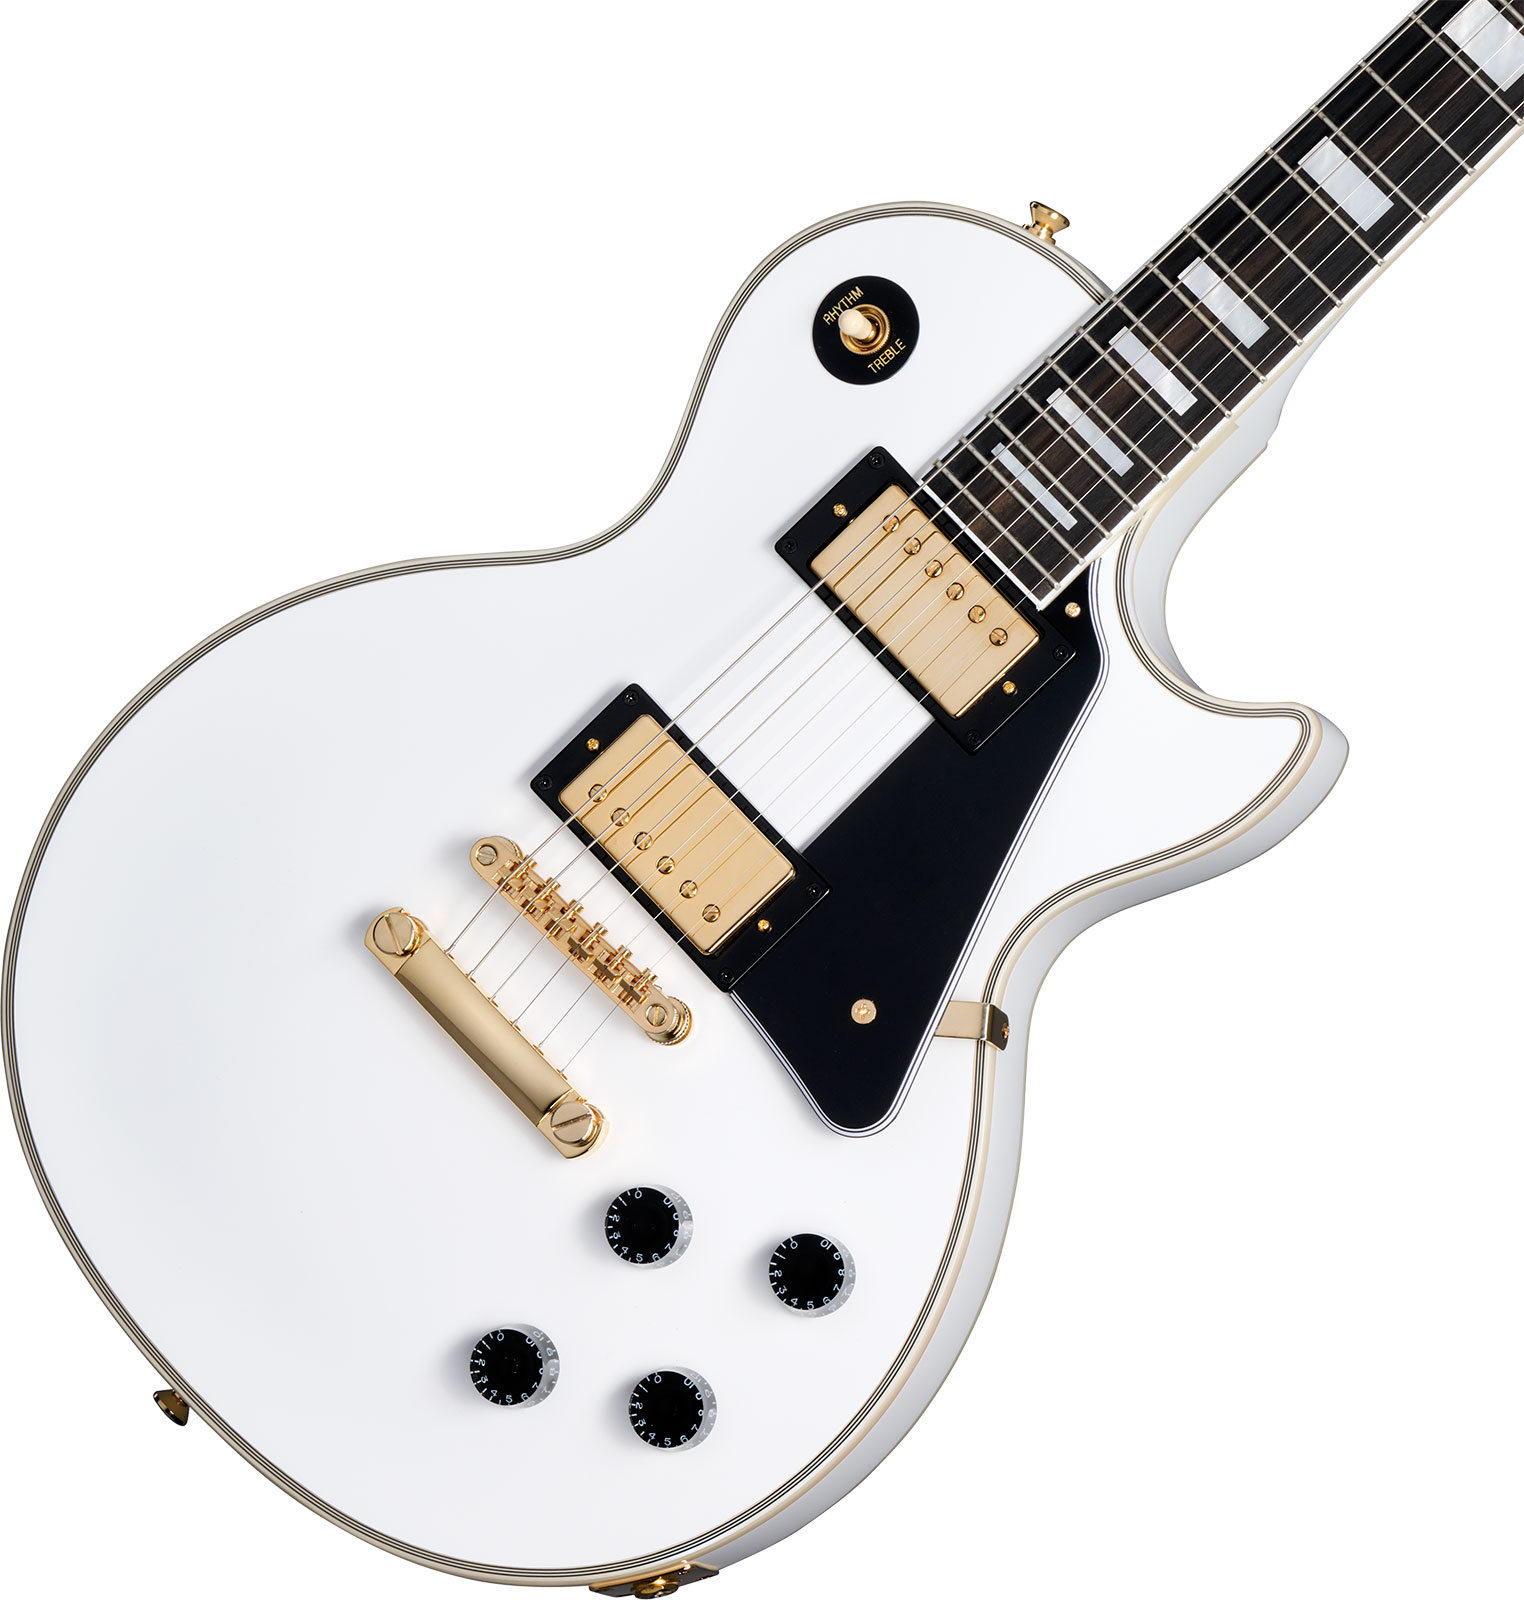 Epiphone Les Paul Custom Inspired By 2h Ht Eb - Alpine White - Single cut electric guitar - Variation 3